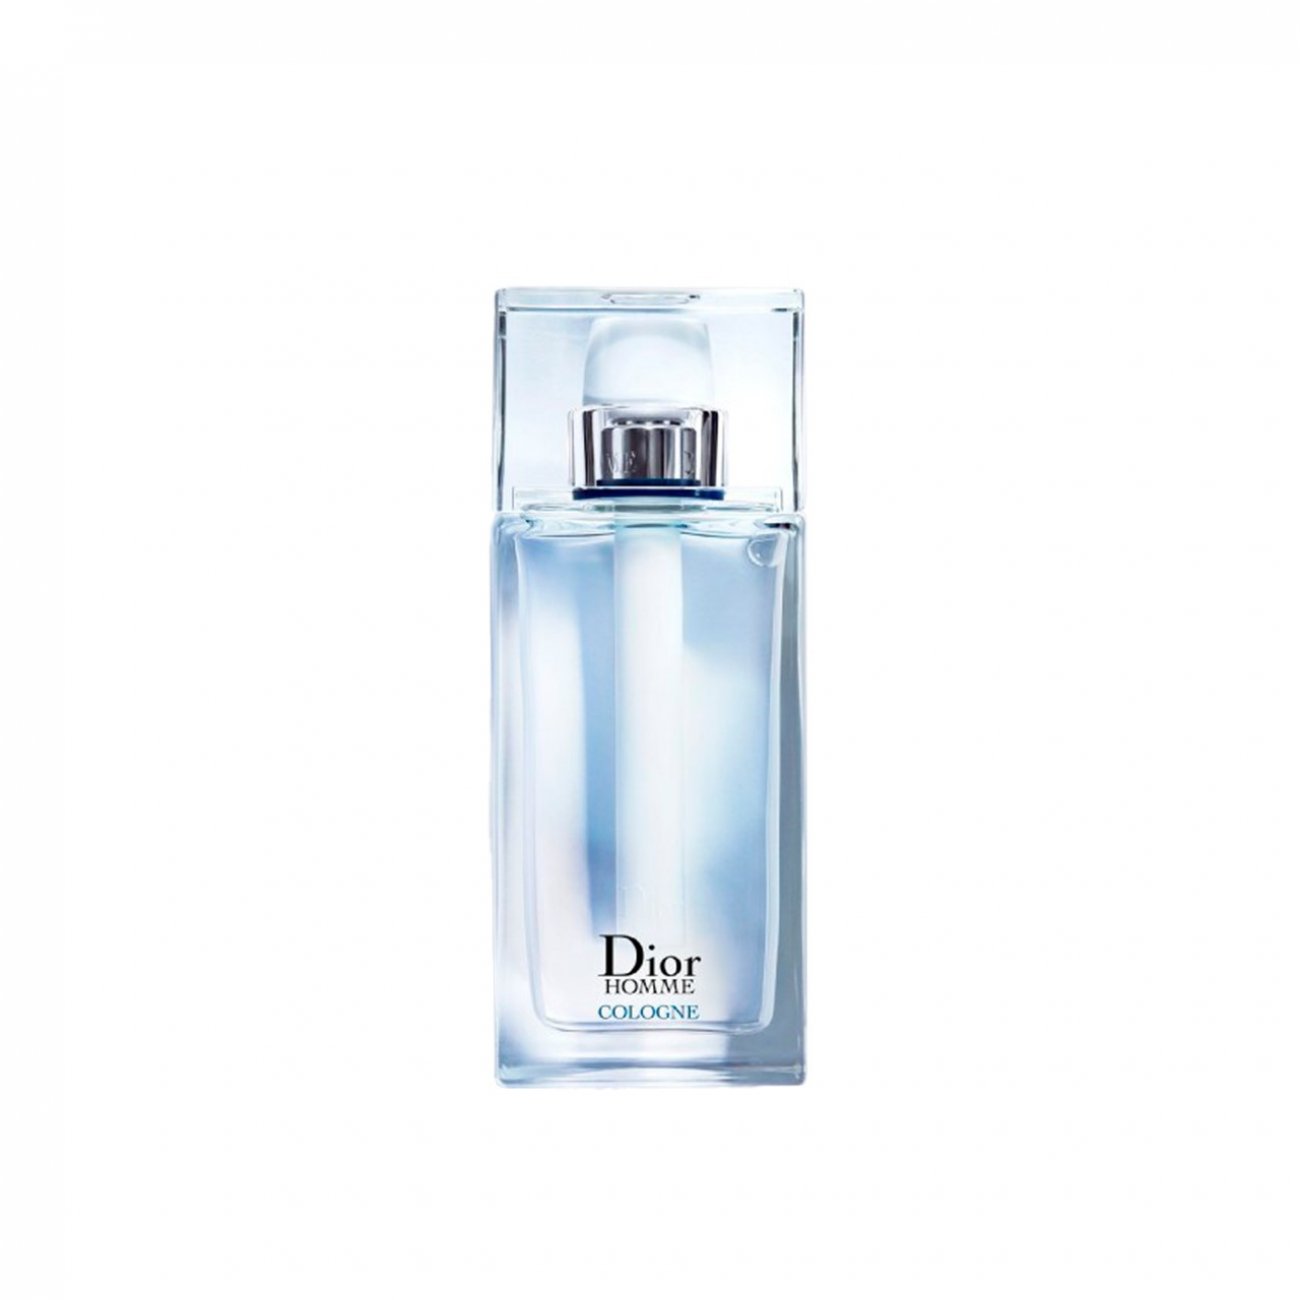 20 Best Dior Sauvage  Read This First